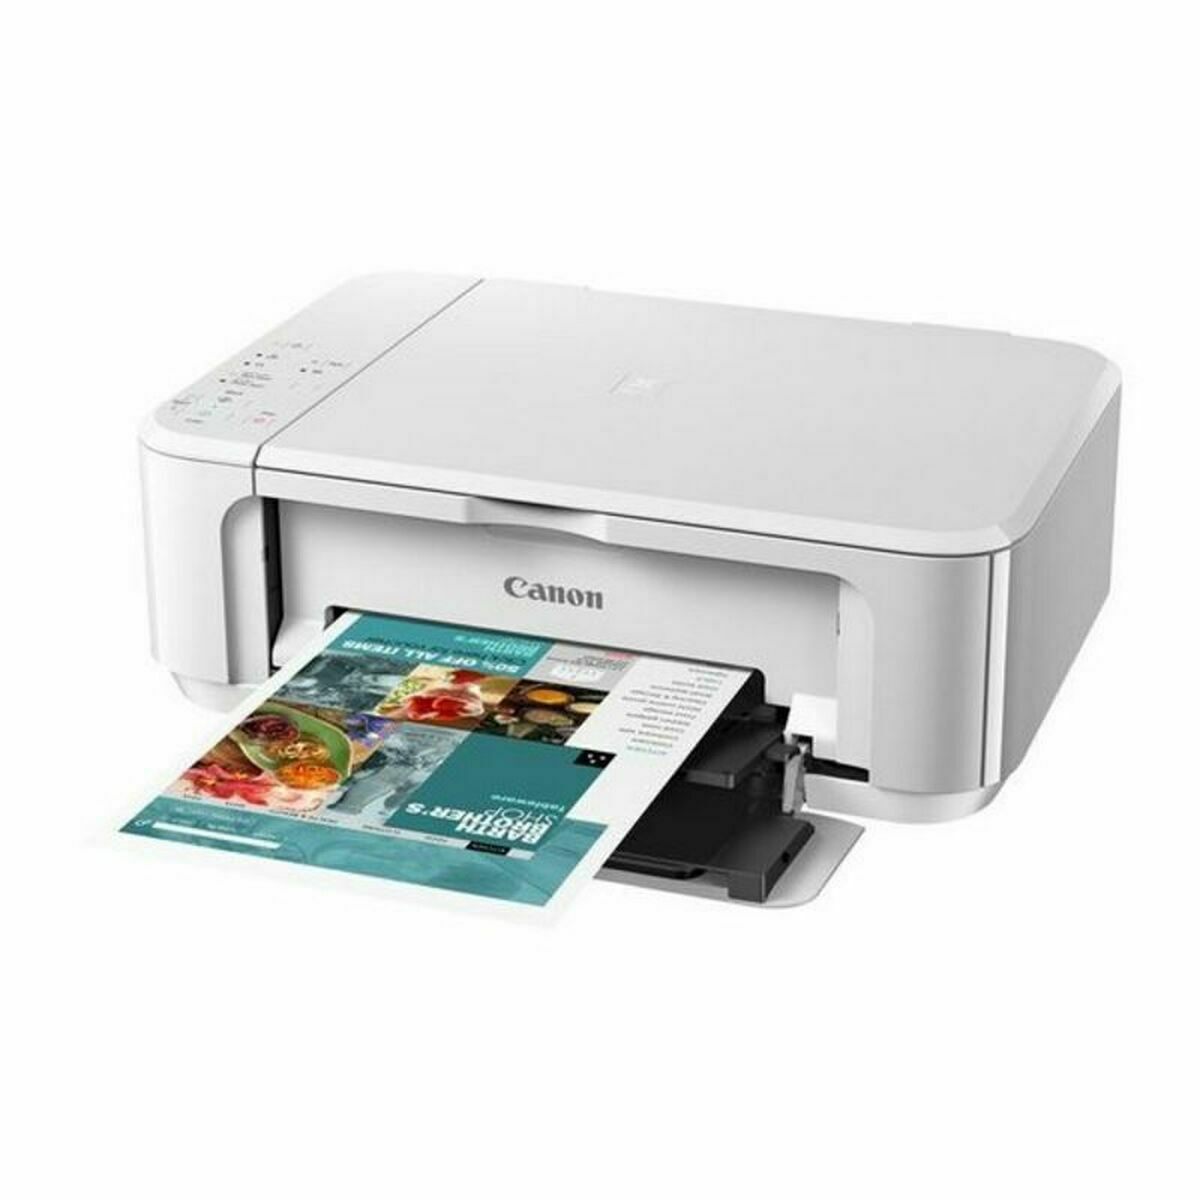 Multifunction Printer Canon Pixma MG3650S 10 ppm WIFI, Canon, Computing, Printers and accessories, multifunction-printer-canon-pixma-mg3650s-10-ppm-wifi, Brand_Canon, category-reference-2609, category-reference-2642, category-reference-2645, category-reference-t-19685, category-reference-t-19911, category-reference-t-21378, Colour_Black, Colour_White, computers / peripherals, Condition_NEW, office, Price_50 - 100, Teleworking, RiotNook